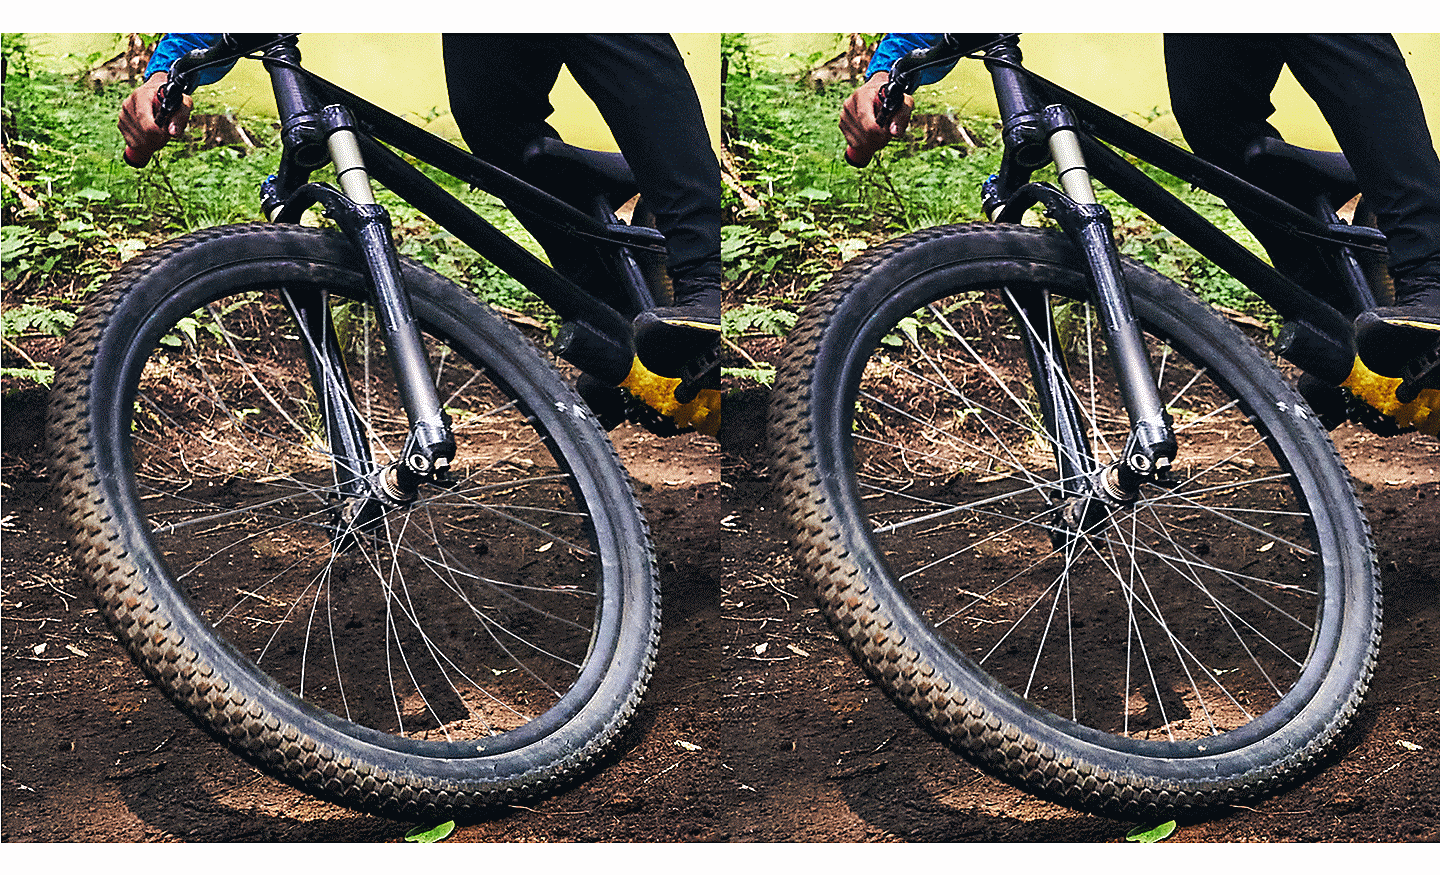 Two images of a mountain bike wheel, one with distorted spokes, one without.